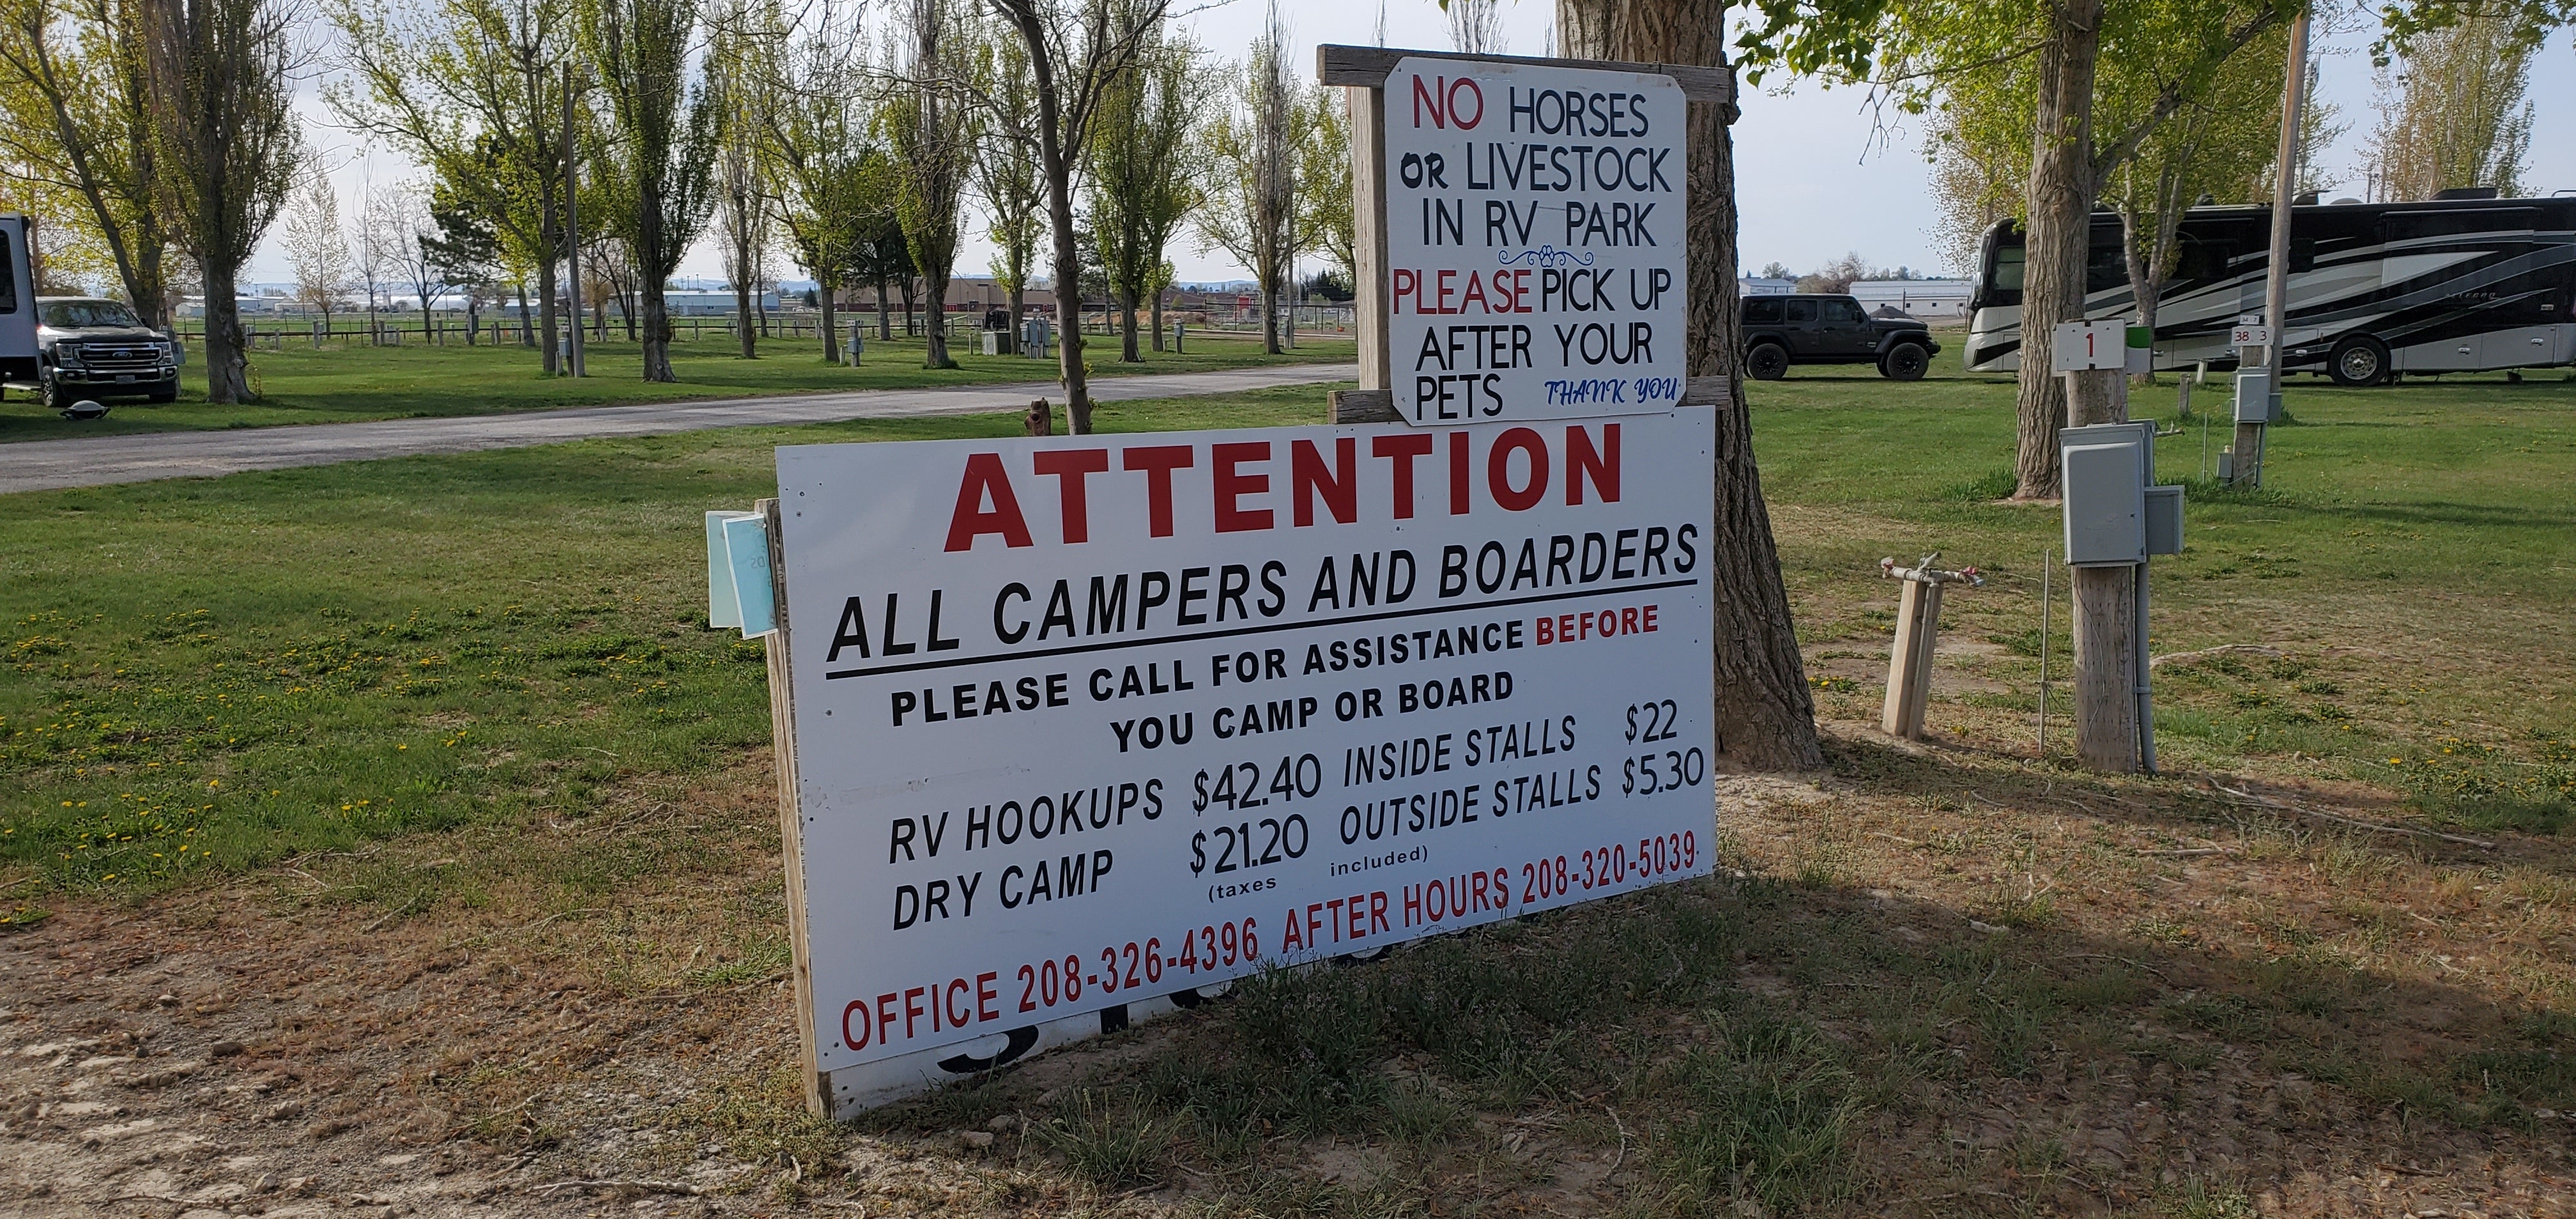 Camper submitted image from Twin Falls County Fairgrounds - 3